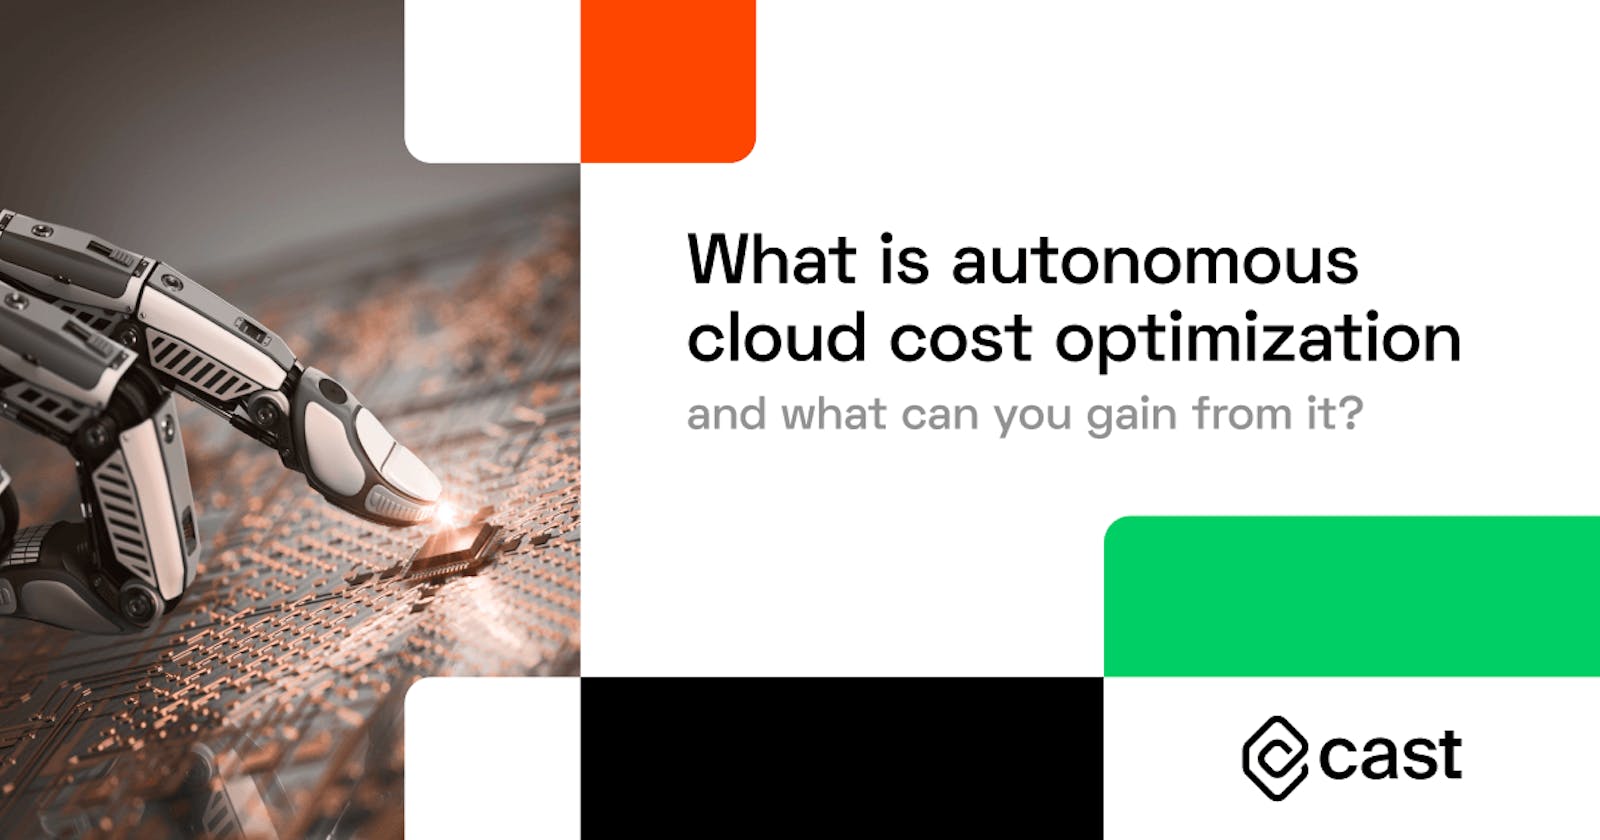 What is autonomous cloud cost optimization and what can you gain from it?